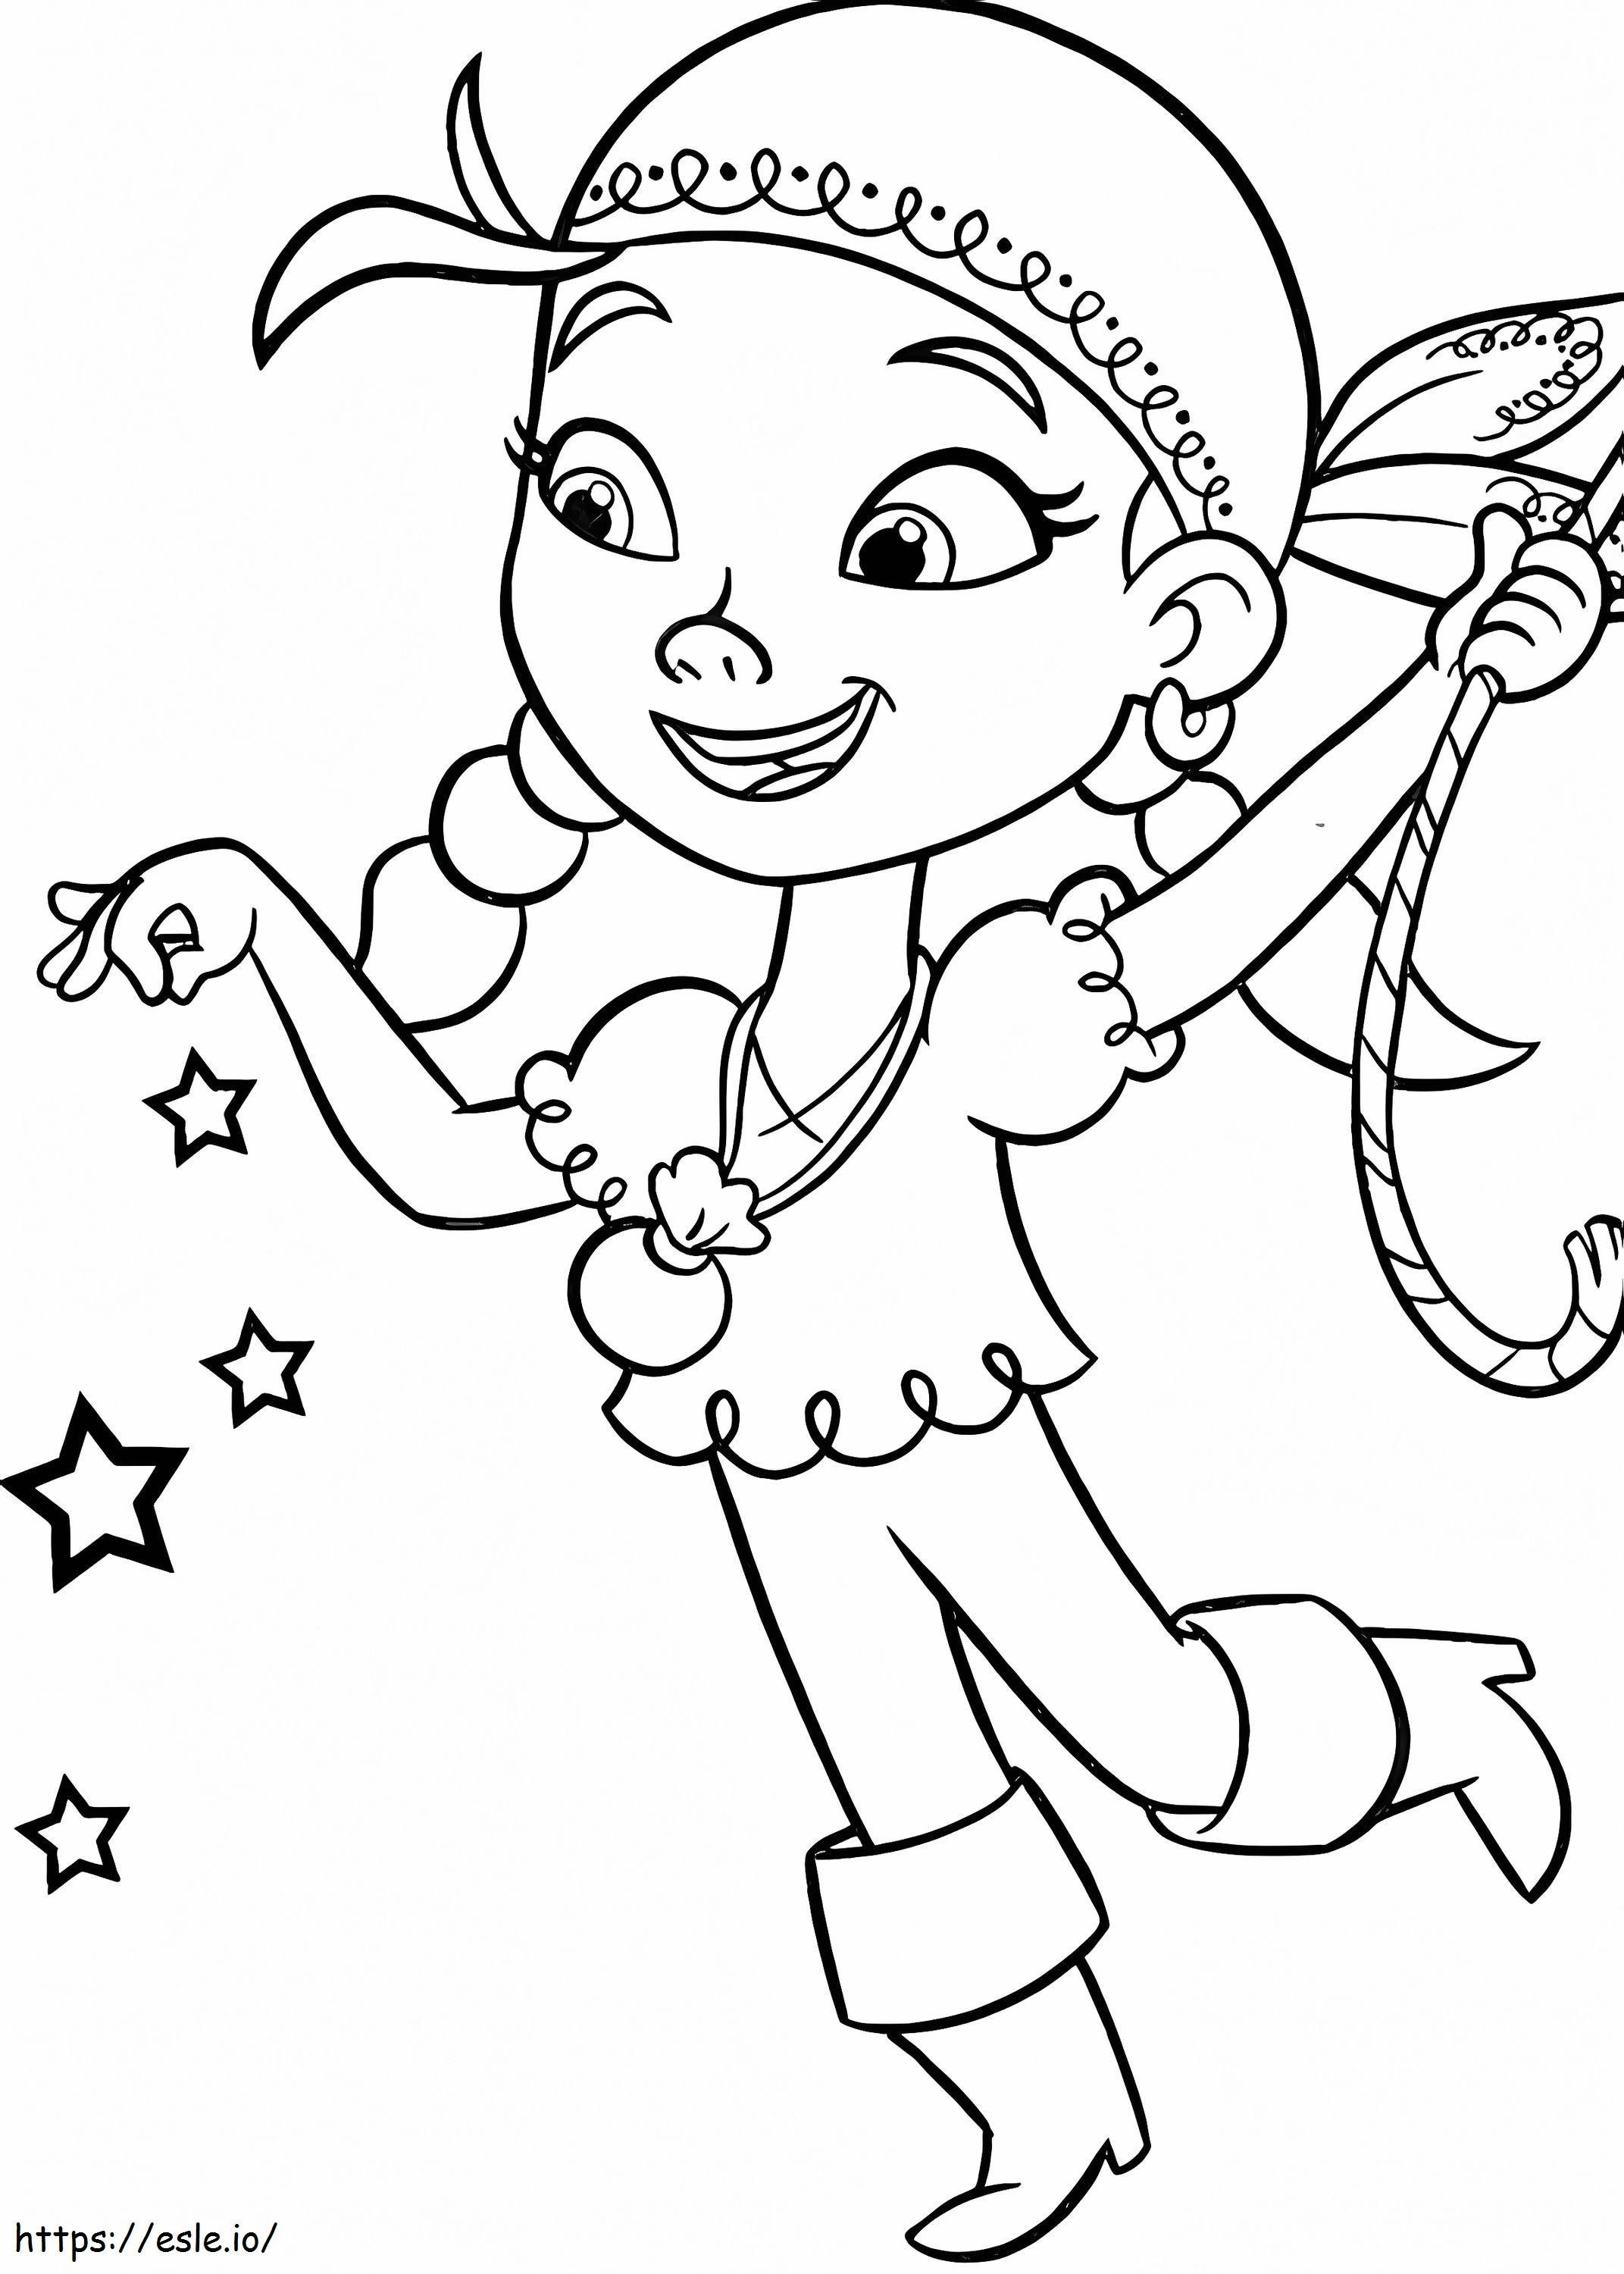 Pirate Girl coloring page